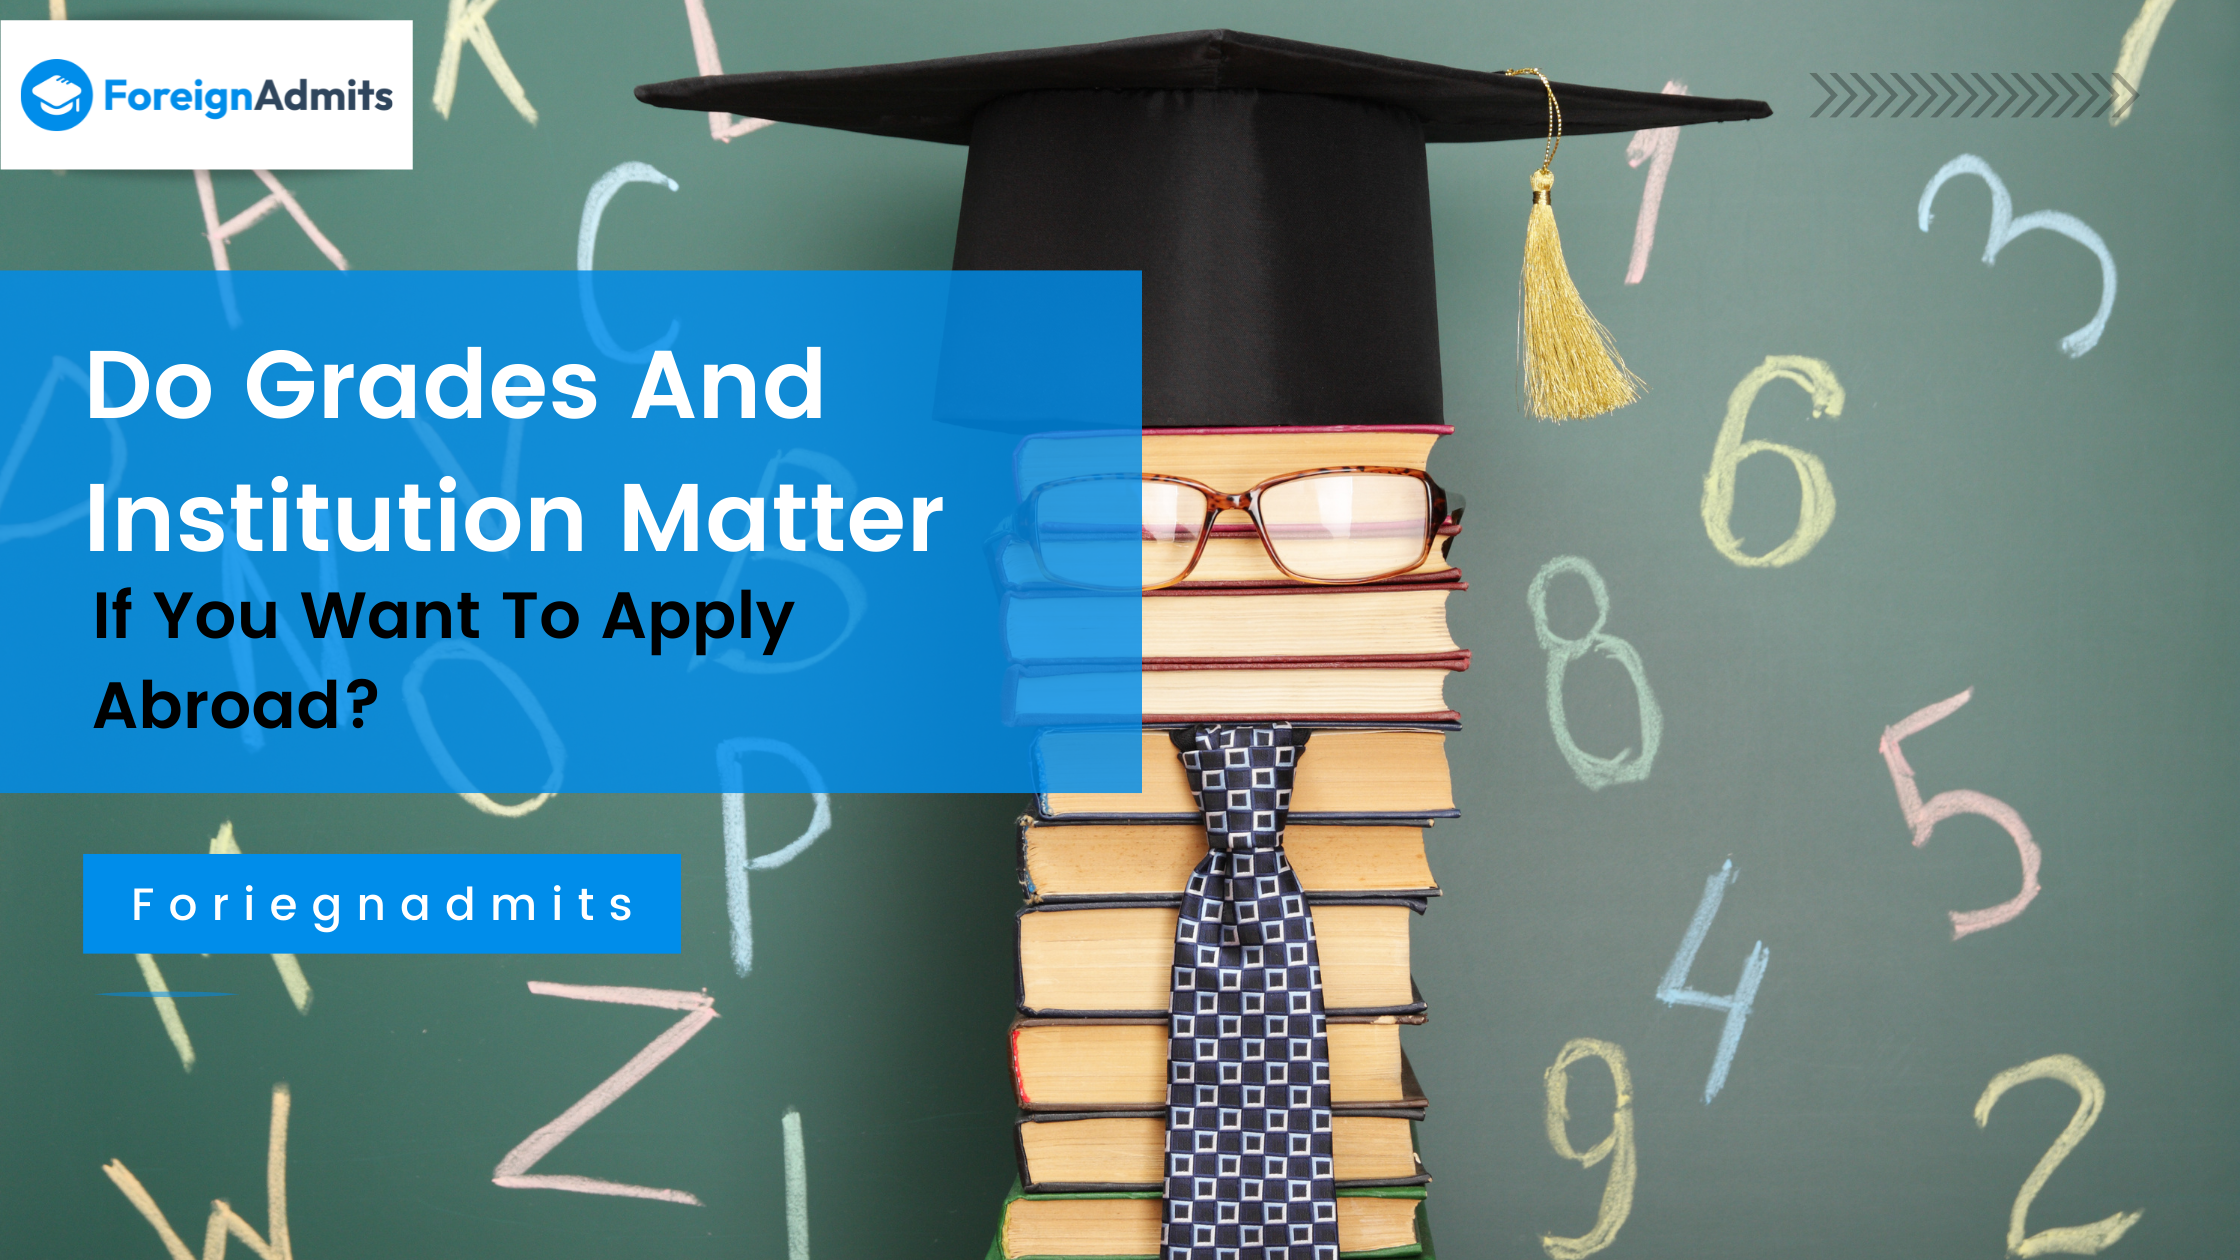 Do Grades And Institution Matter If You Want To Apply Abroad?